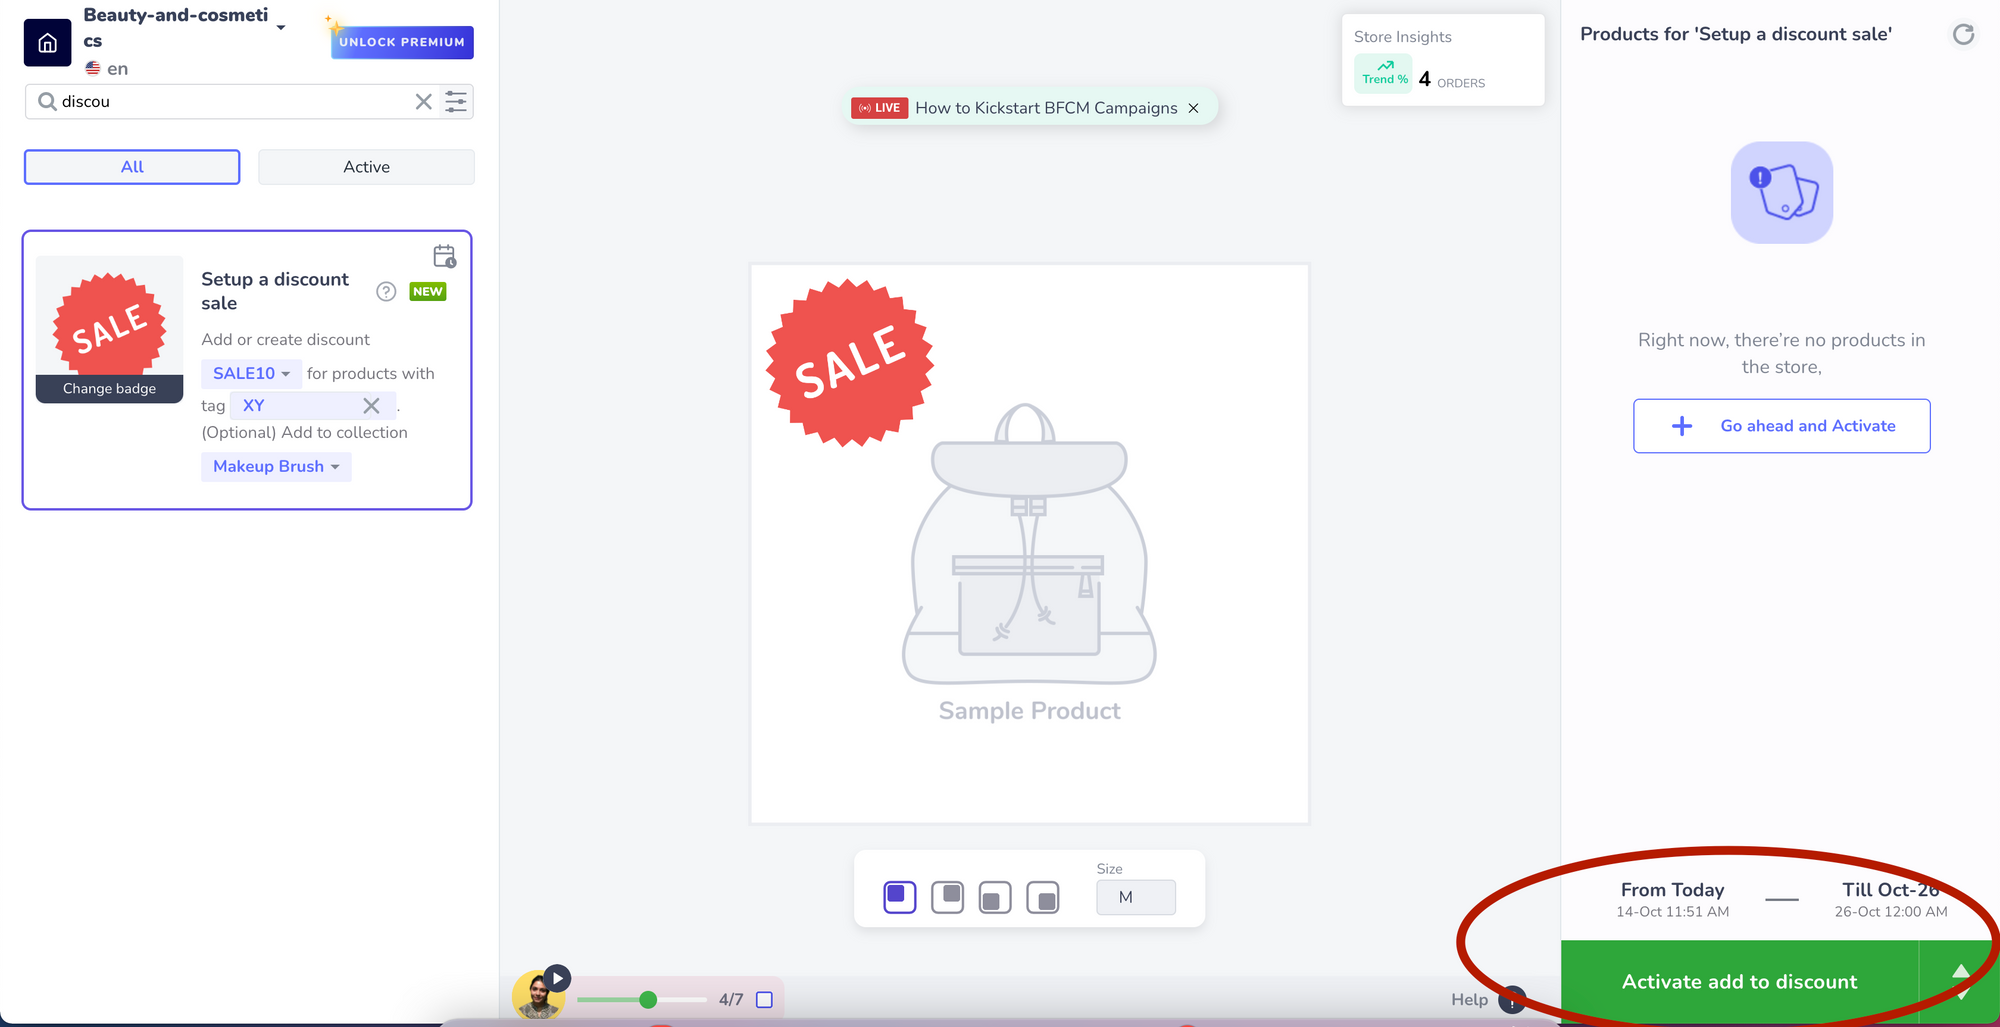 The Discount Sale editor with "Activate add to discount" circled